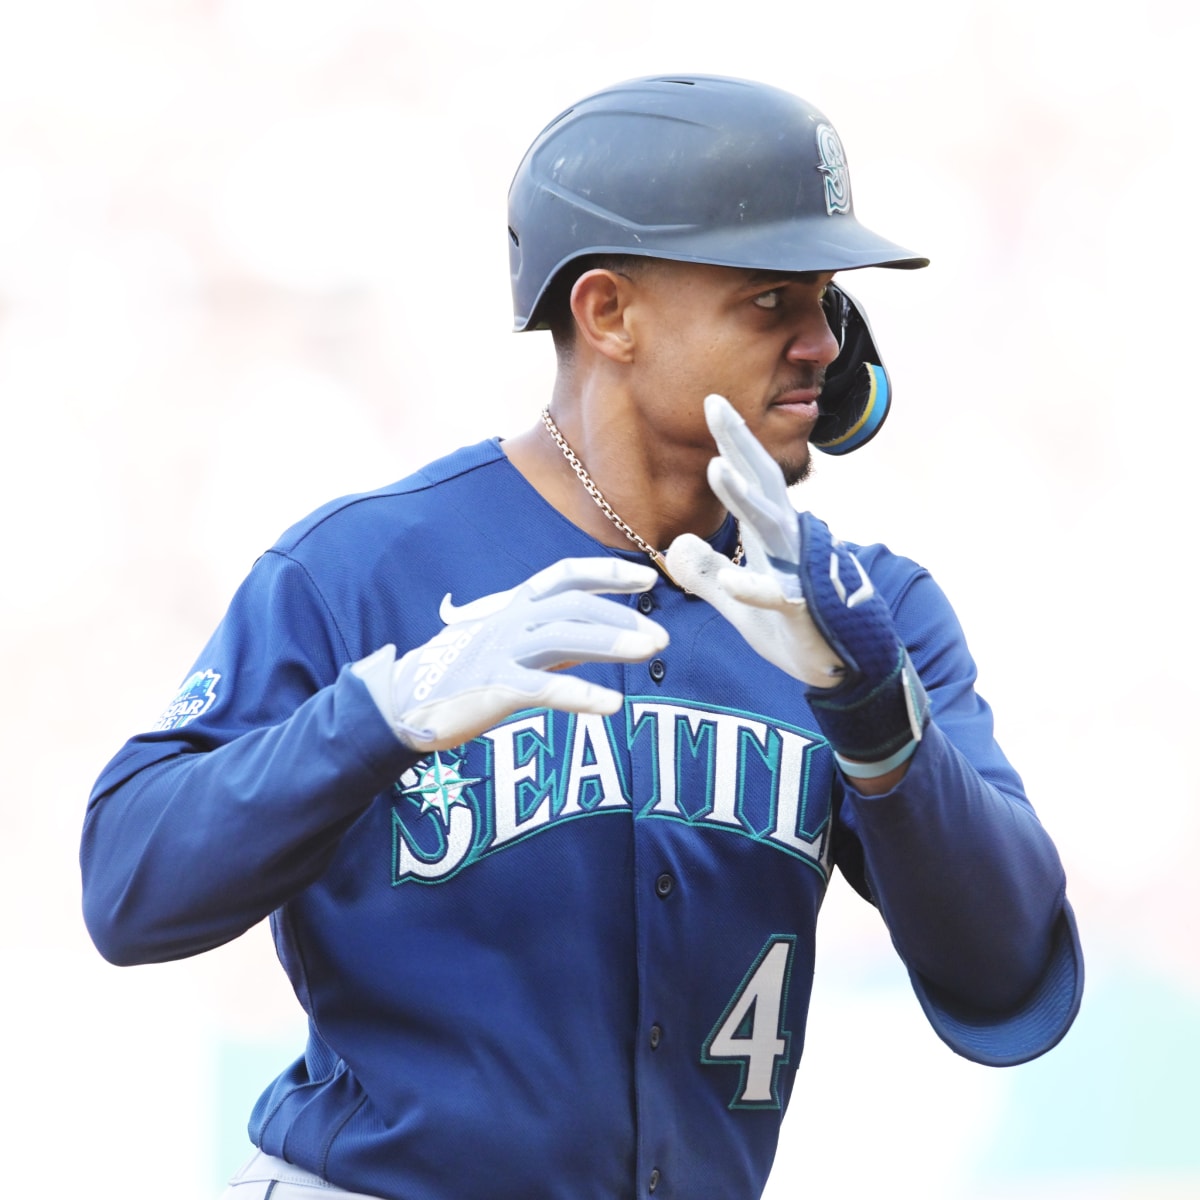 WATCH: Seattle Mariners Debut New Home Run Trident - Fastball